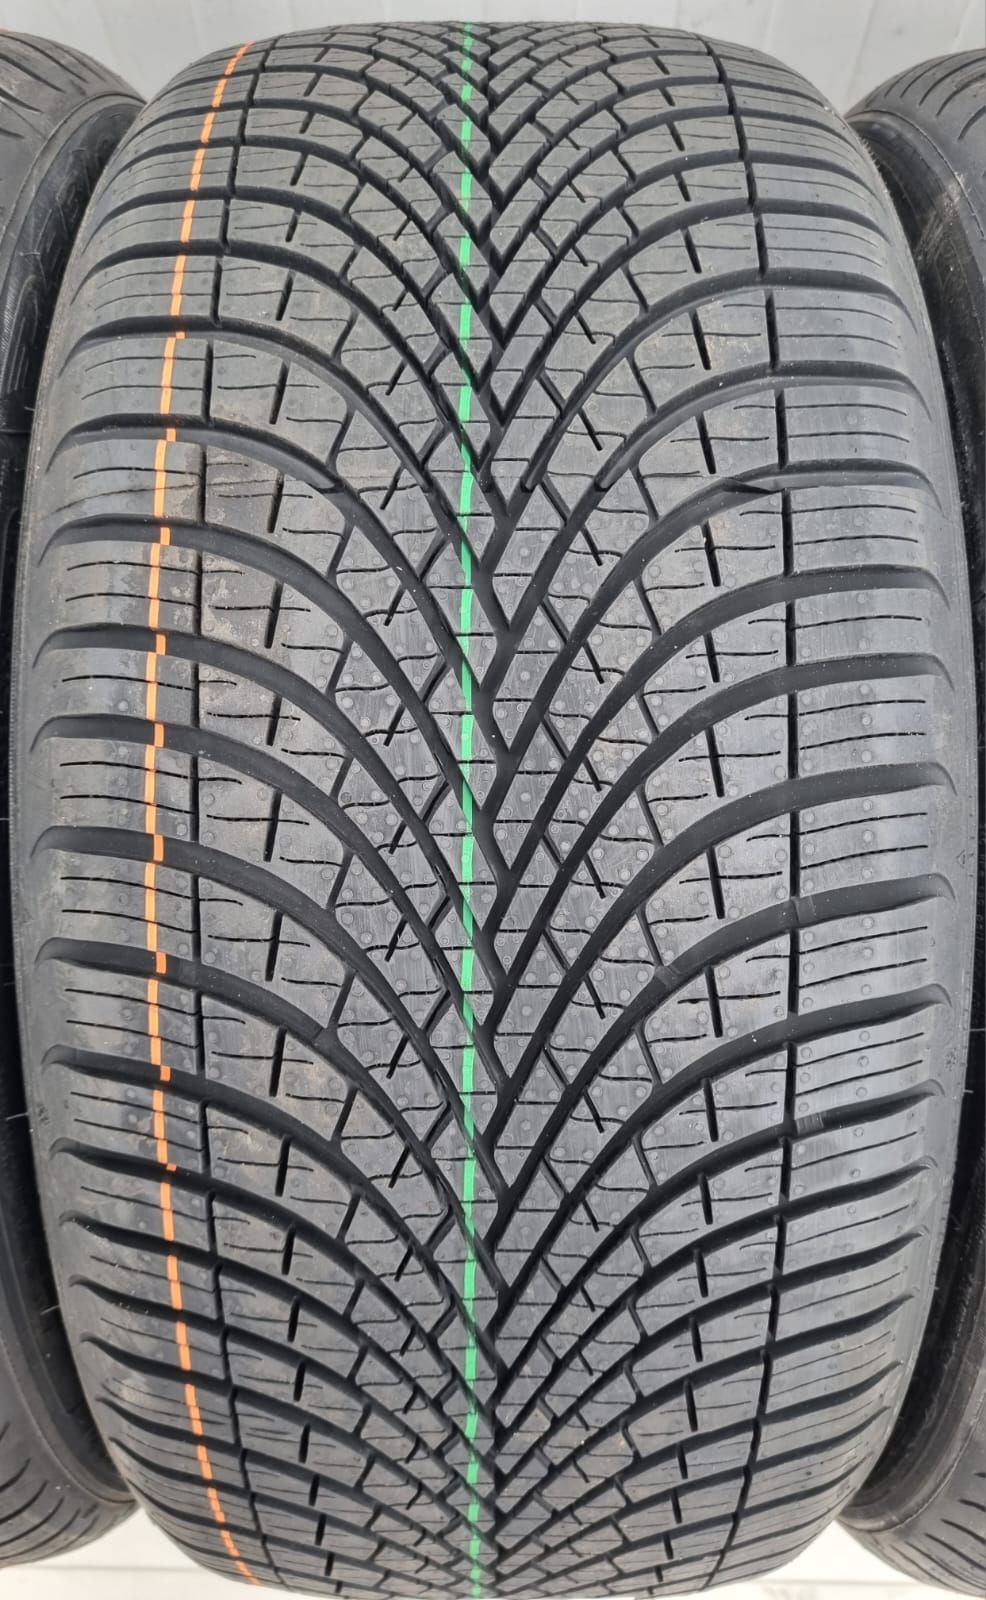 225/40 R18, 92V, DEBICA ( by GOODYEAR ), Anvelope mixte M+S